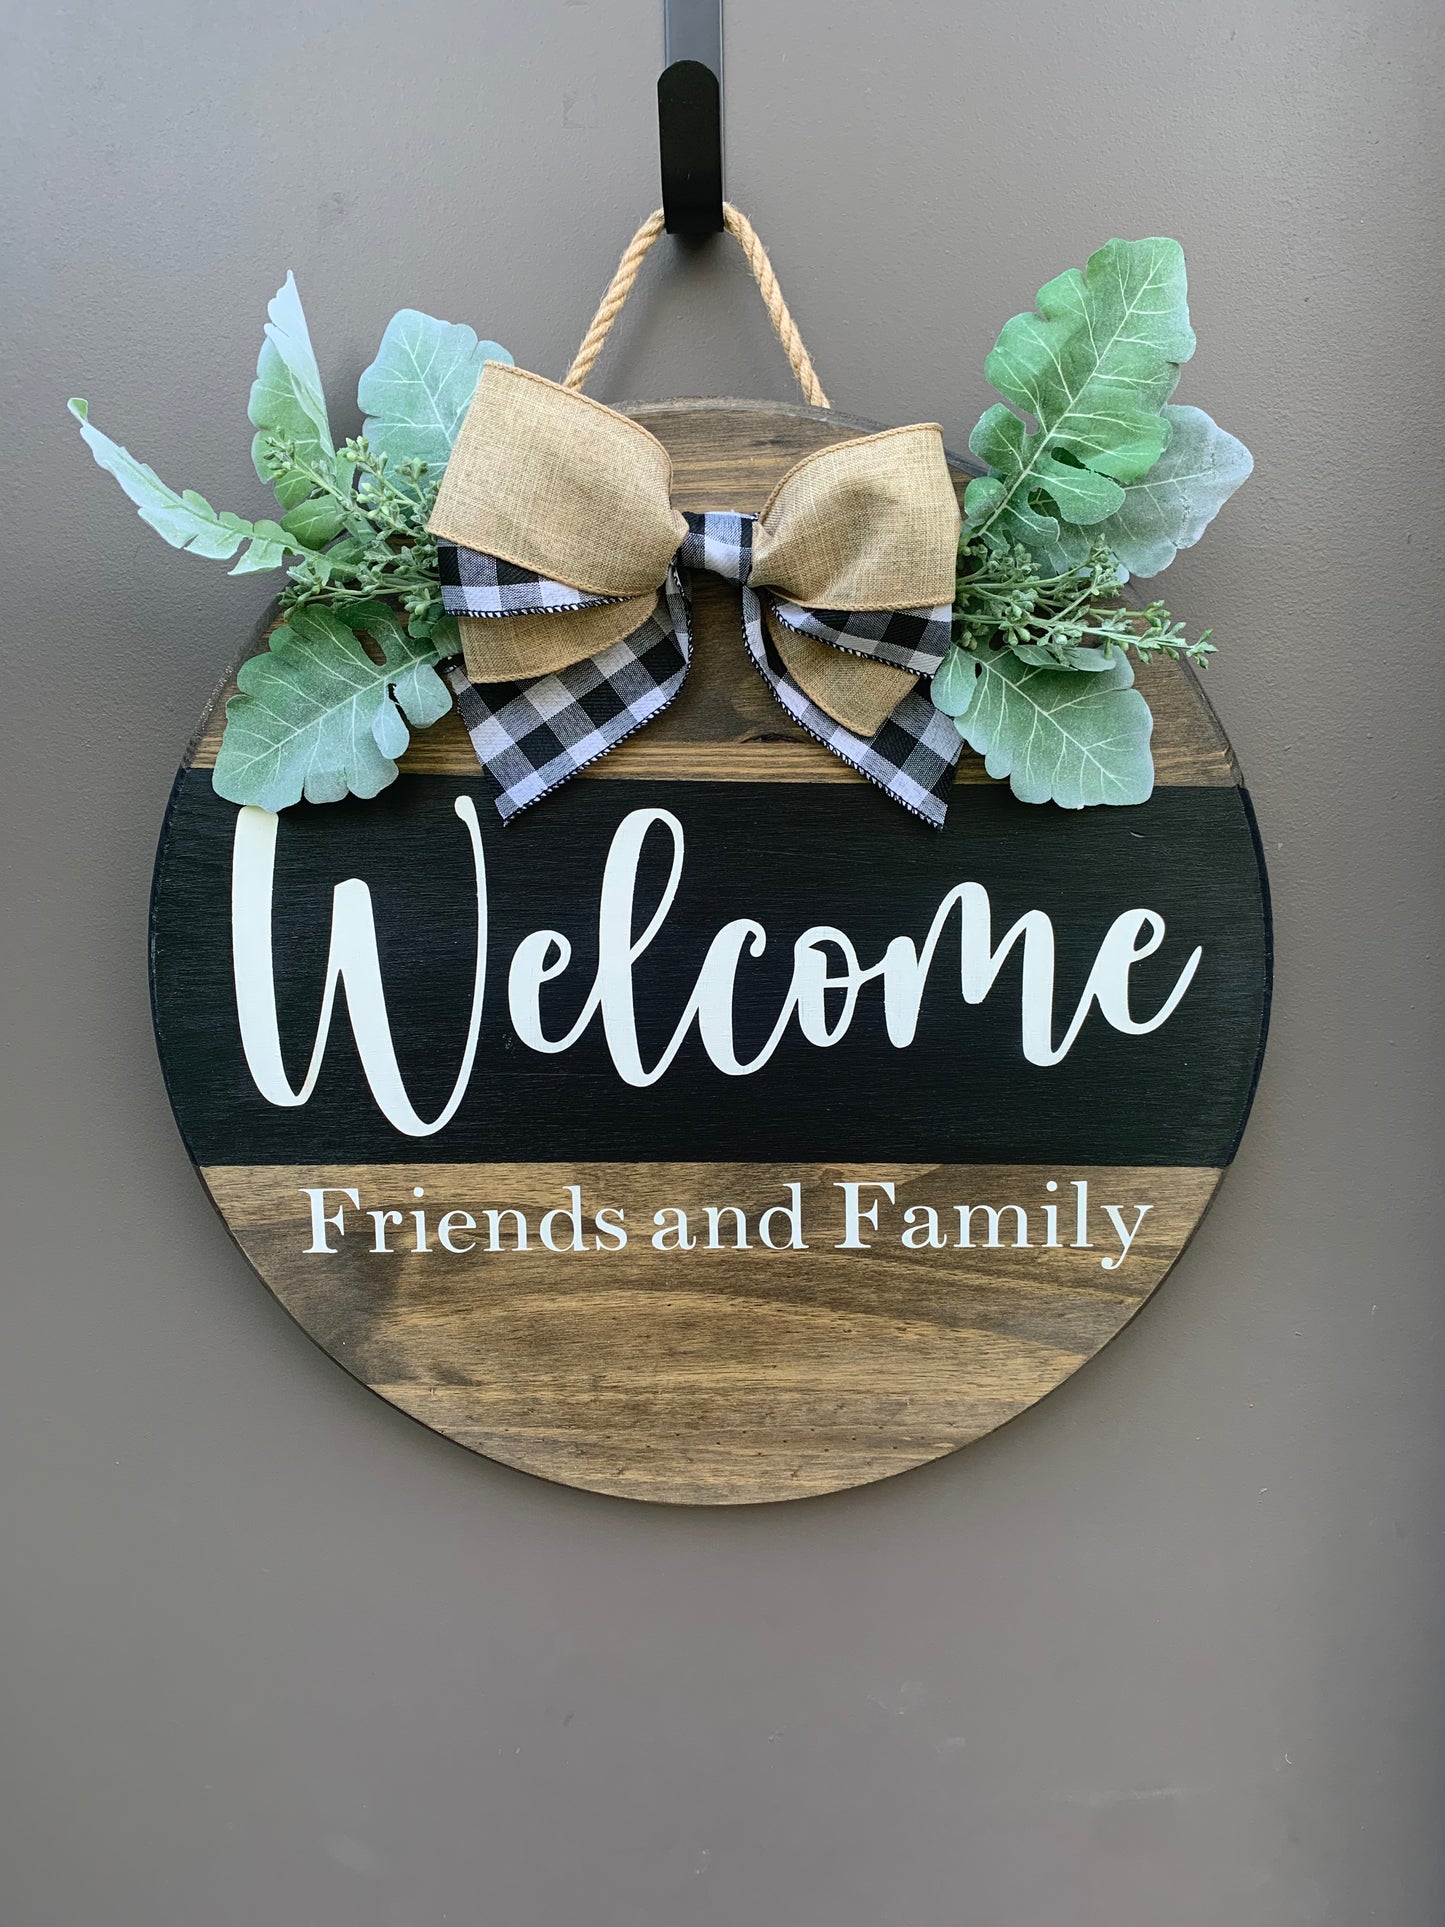 Welcome friends and family 18” wood round sign